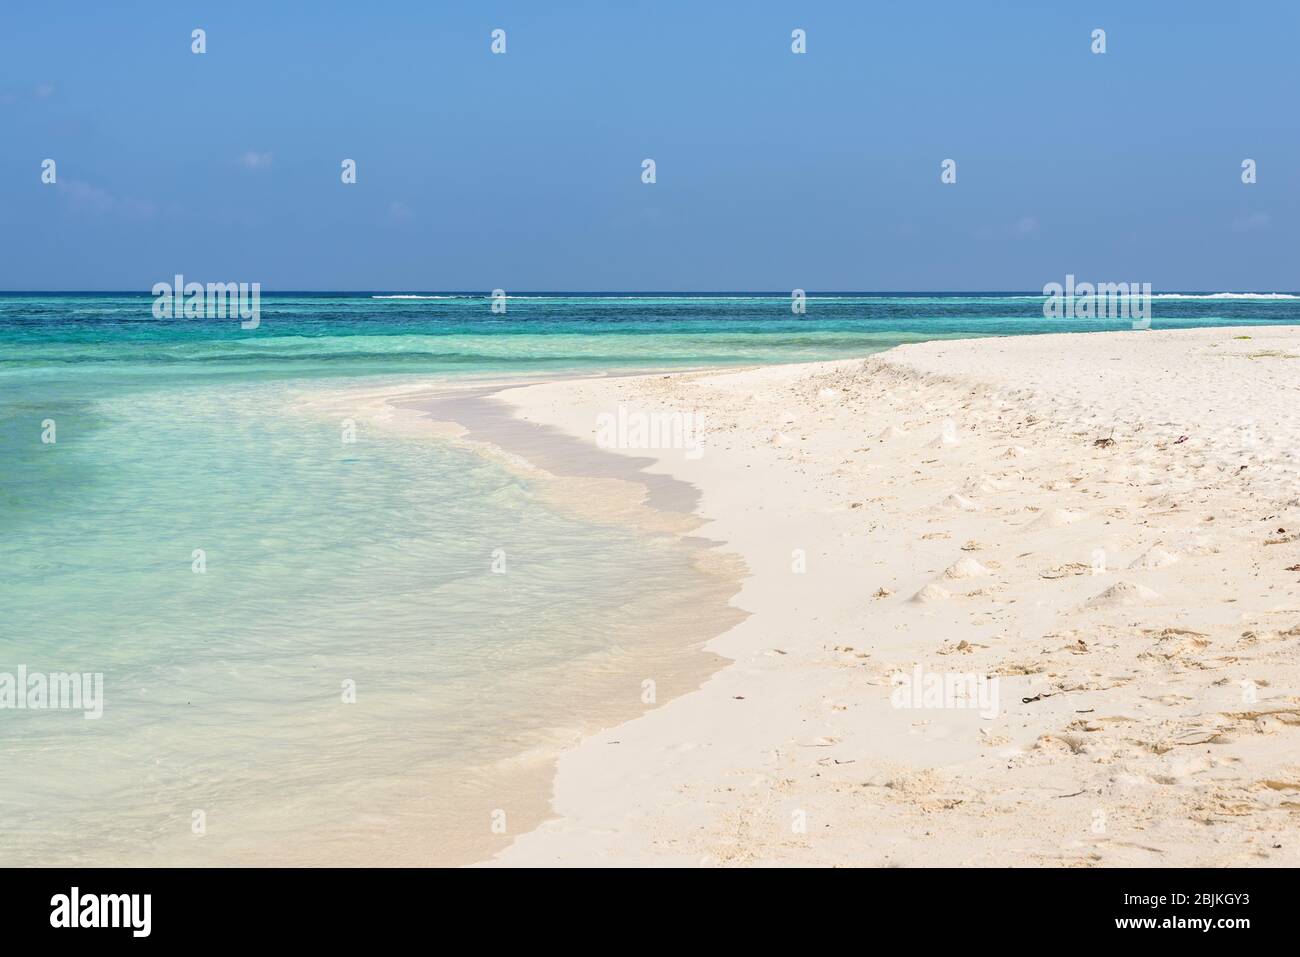 Amazing empty wild beach with turquoise water and white sand. Picturesque seascape with blue sky. Maafushi Island, Maldives, Indian Ocean. Stock Photo